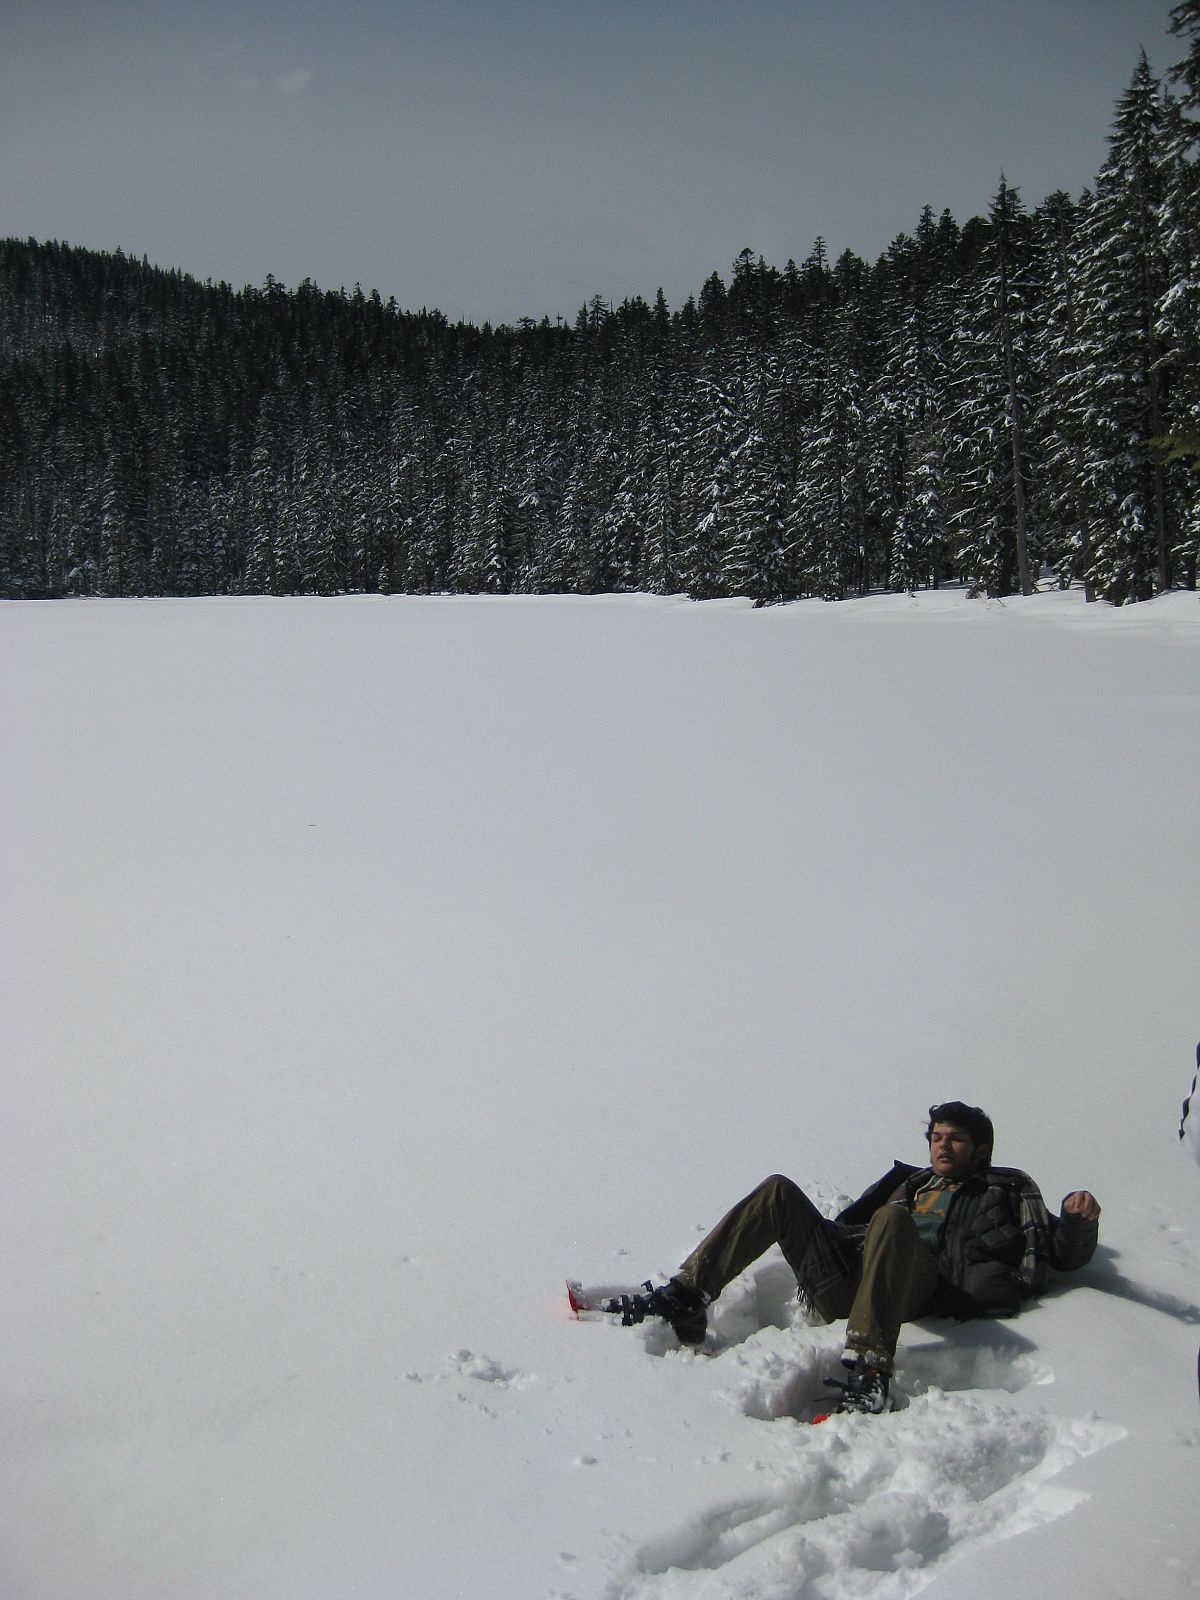 Chilling out on the lake - from the Snowshoe Trip to Twin Lake 2013 photo gallery.